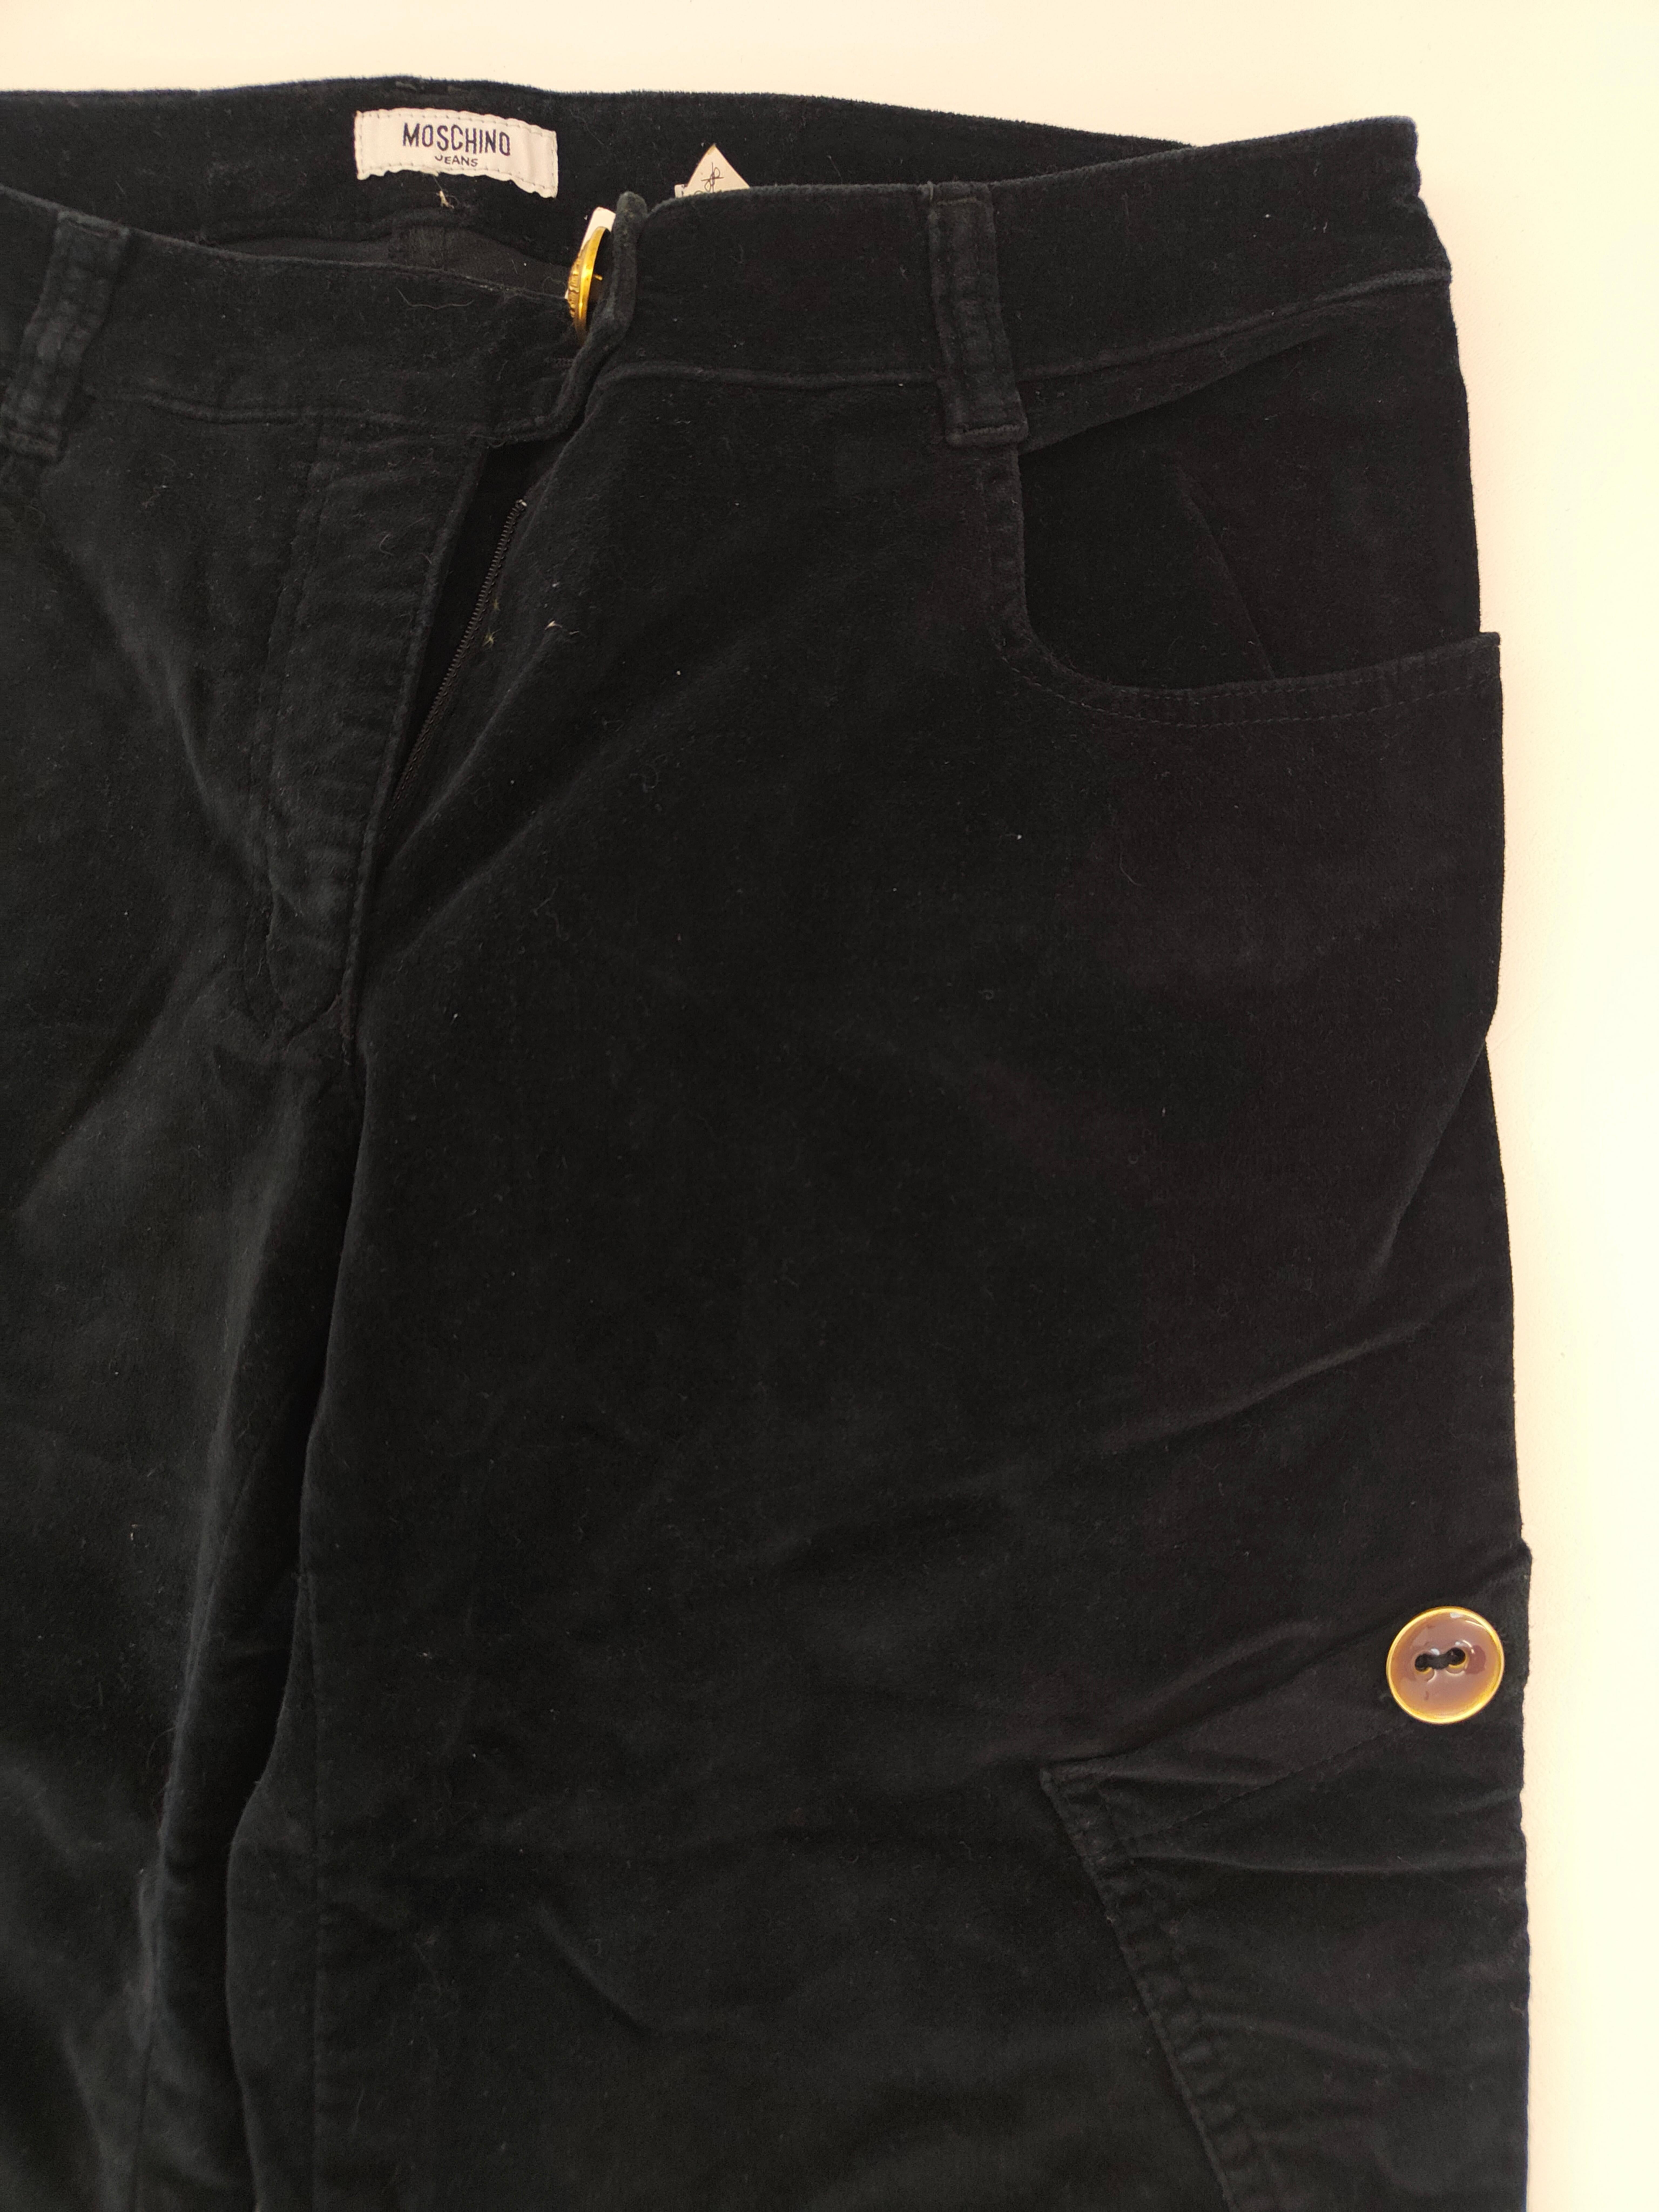 Moschino velvet pants In Good Condition For Sale In Capri, IT